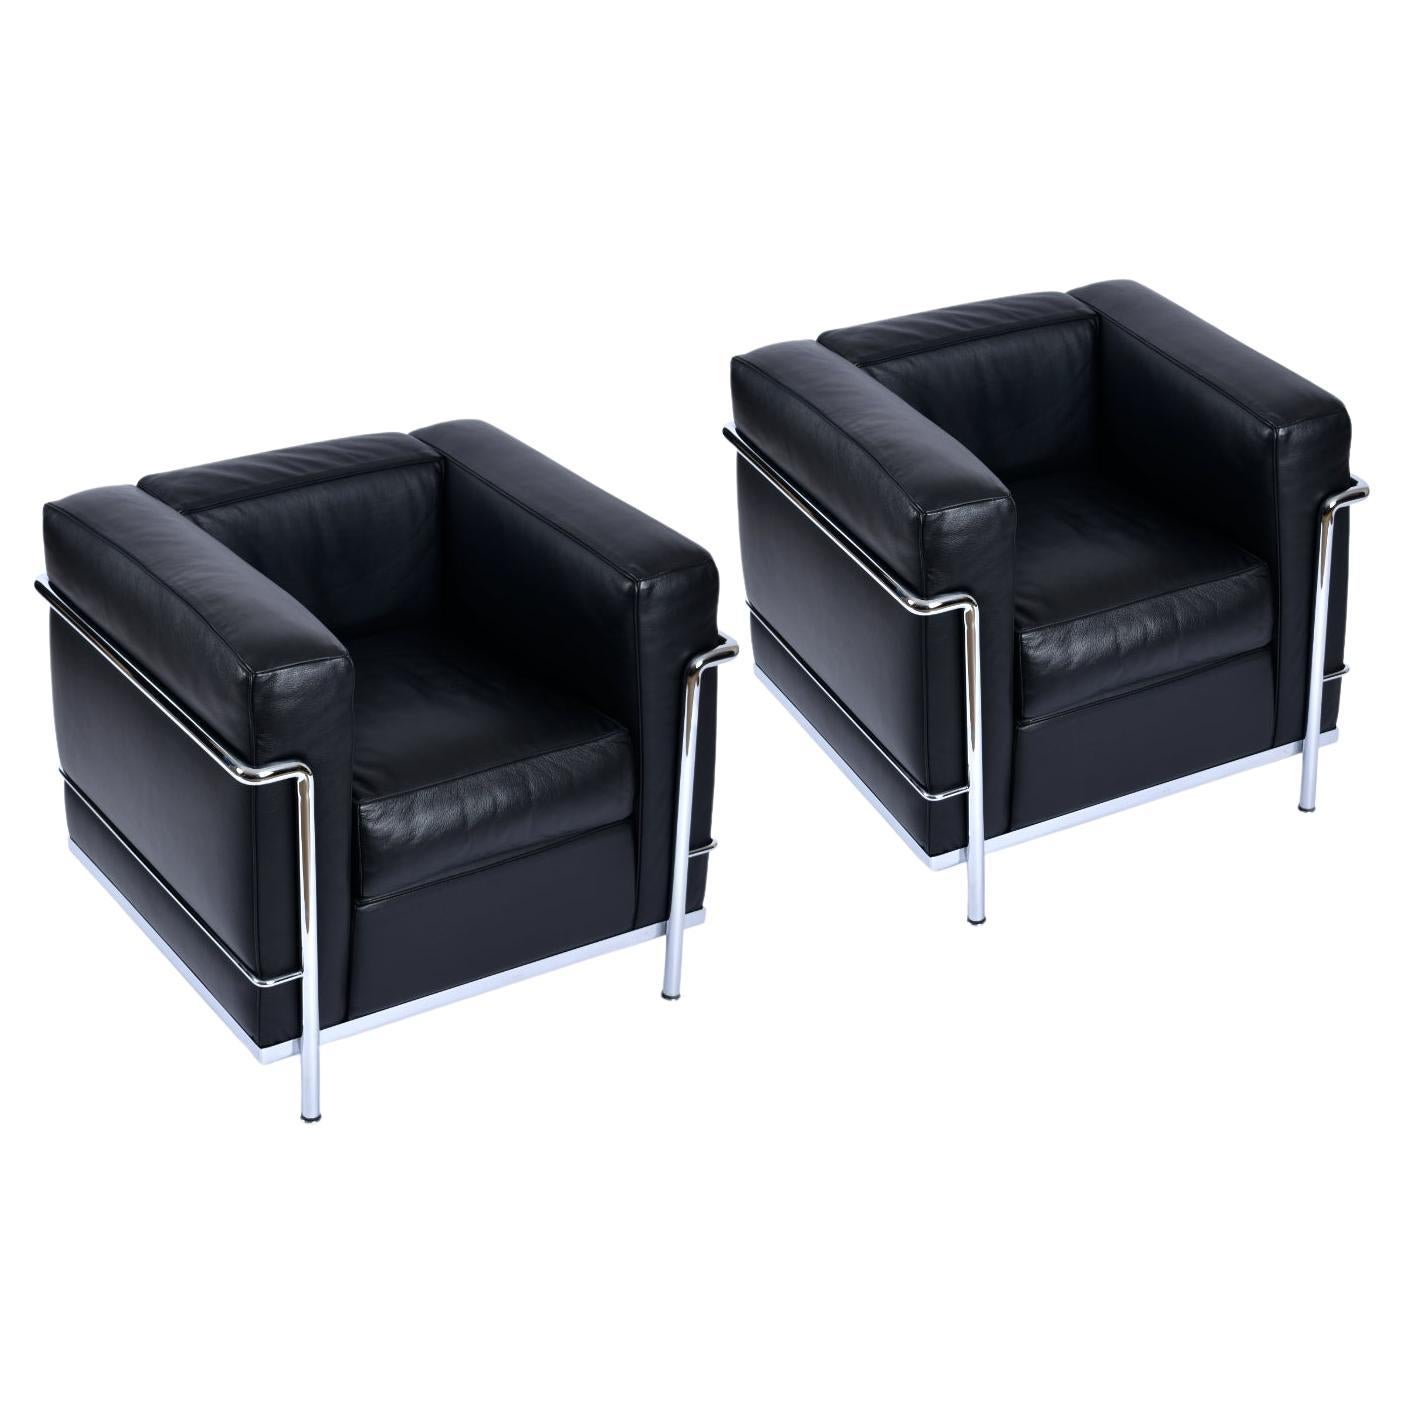 Le Corbusier LC2 Chair by Cassina Made in Italy Chrome and Black Leather